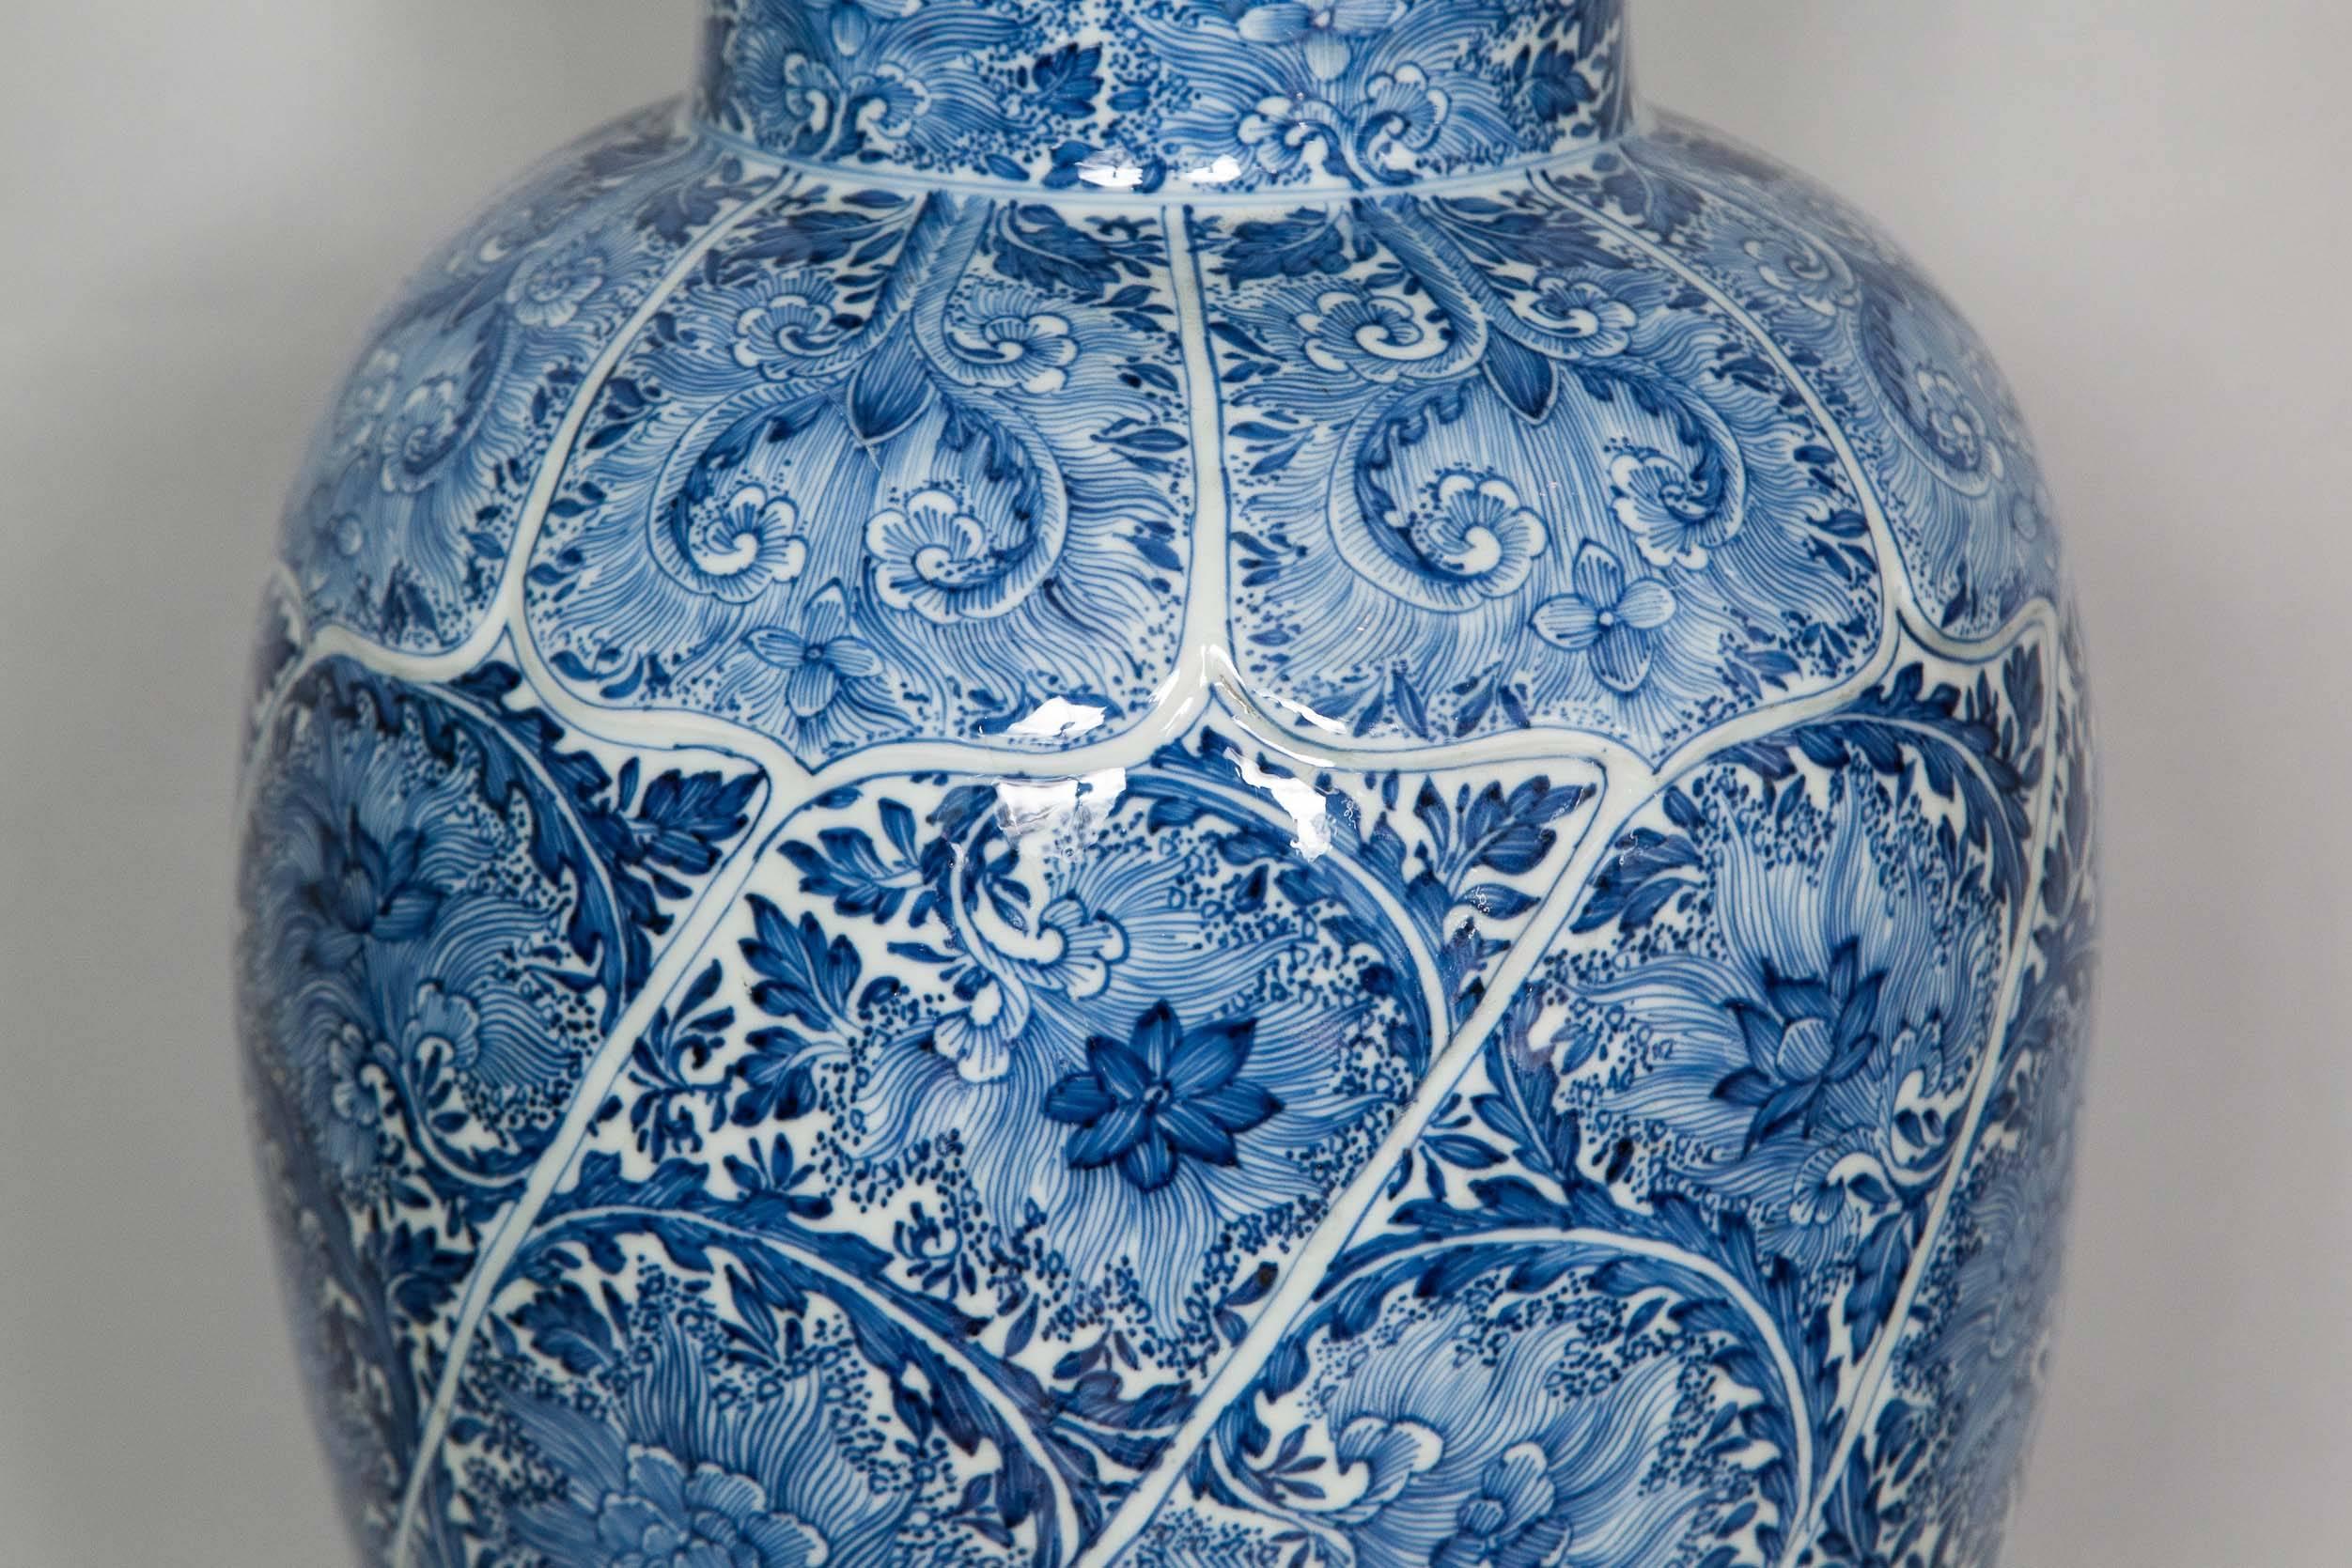 A beautiful example of Chinese Kangxi (1662-1722) porcelain lidded vase dating from circa 1700, painted in under glaze blue with an intricate pattern of scrolling flowers.
The top of the finial has been restored (blue bit)
the body with a hardly